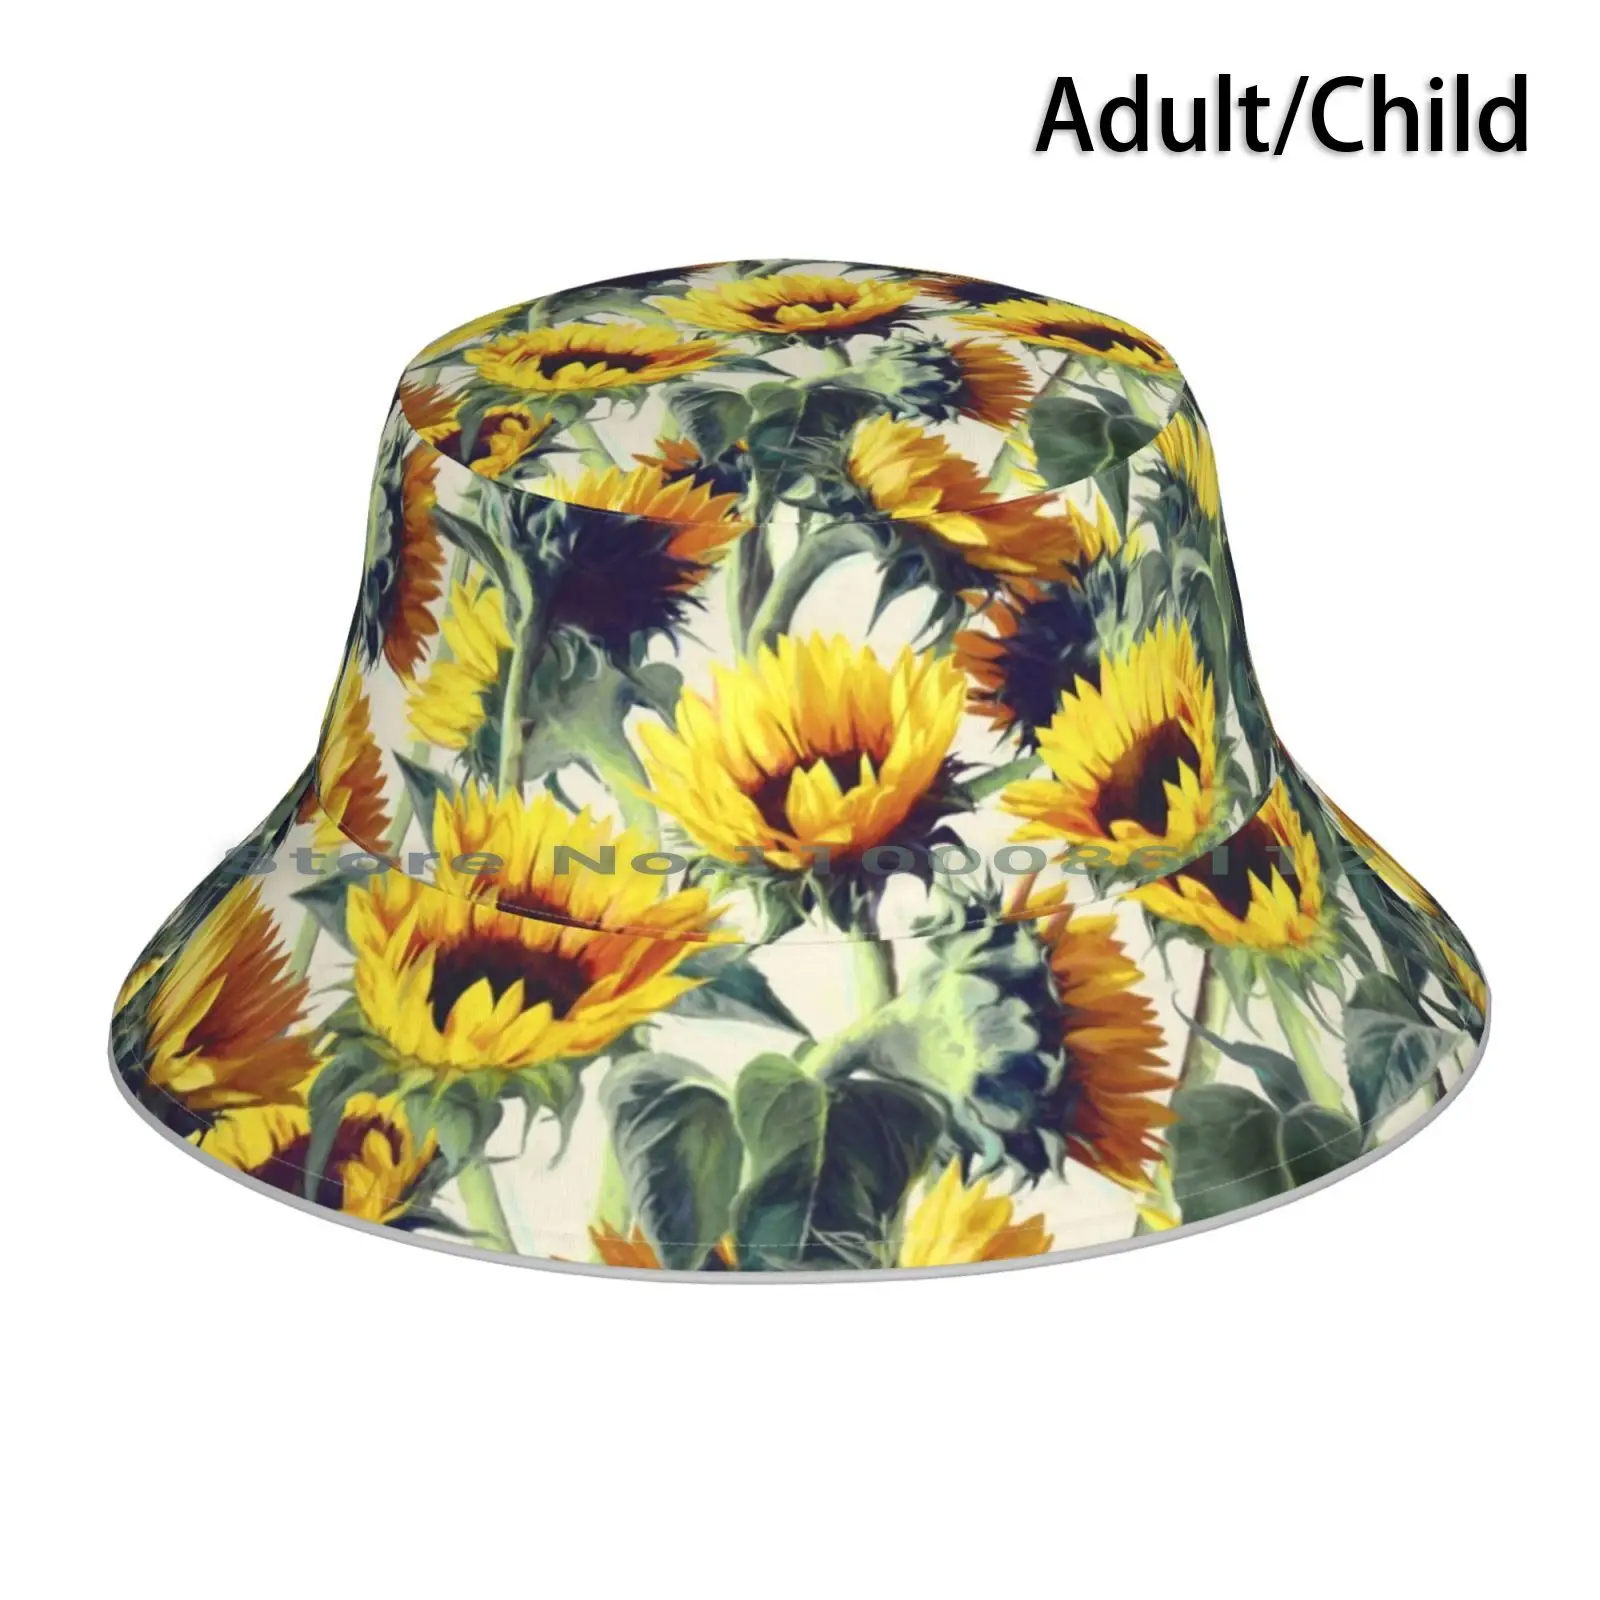 

Sunflowers Forever Bucket Hat Sun Cap Sunflowers Floral Pattern Painted Yellow Olive Green Cream Grey Bright Happy Cheerful